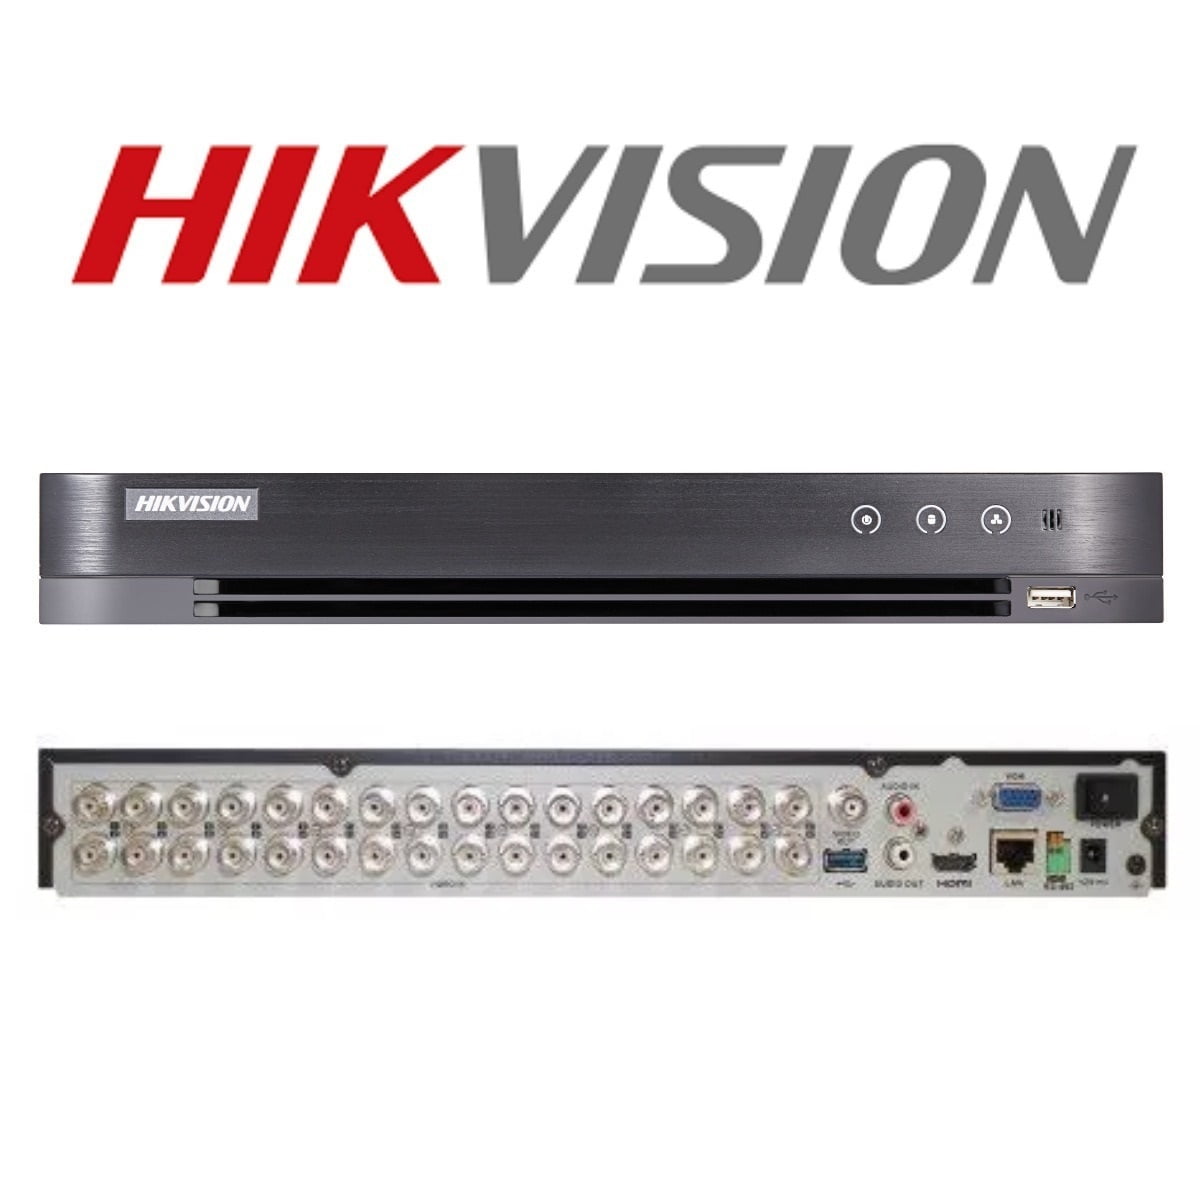 Dvr stand alone Hikvision Ds-7232hqhi-k2 32 canais Full Hd 1080p 